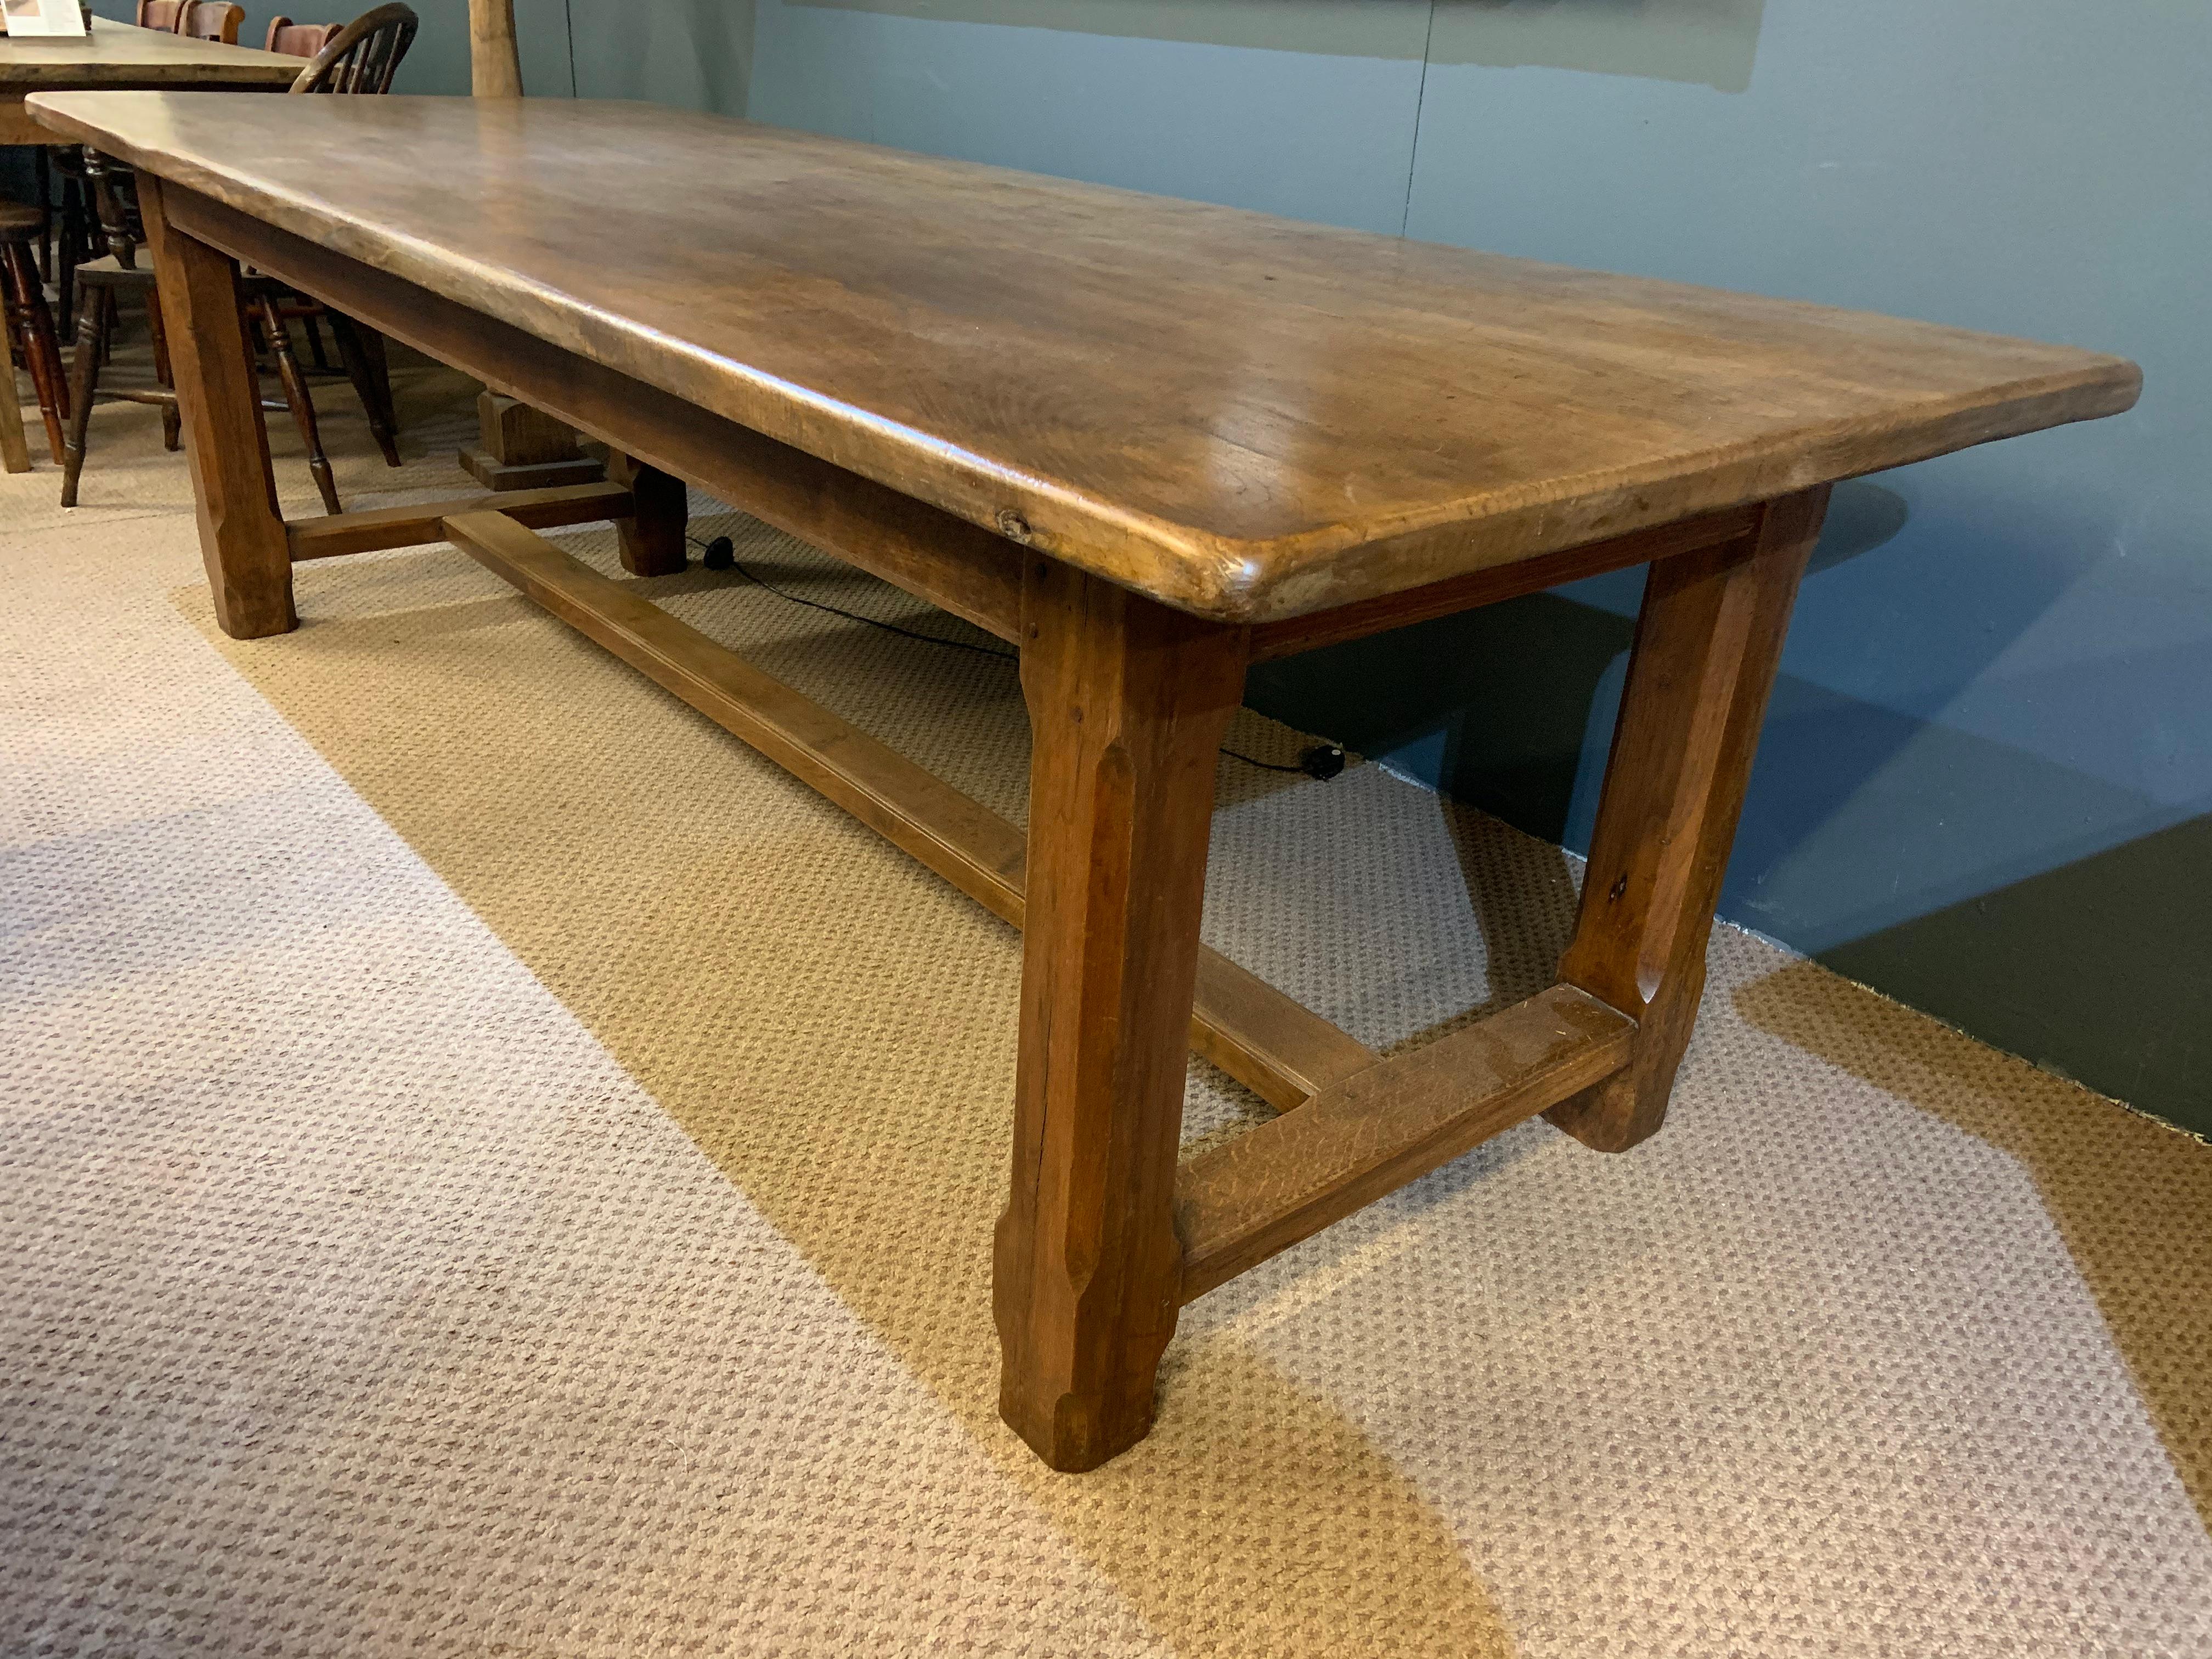 Early 20th century wide oak farmhouse table with centre stretcher. The table has a beautiful wide top and stands on a very sturdy base. Gorgeous colour and patination. Absolutely love this table.  
 